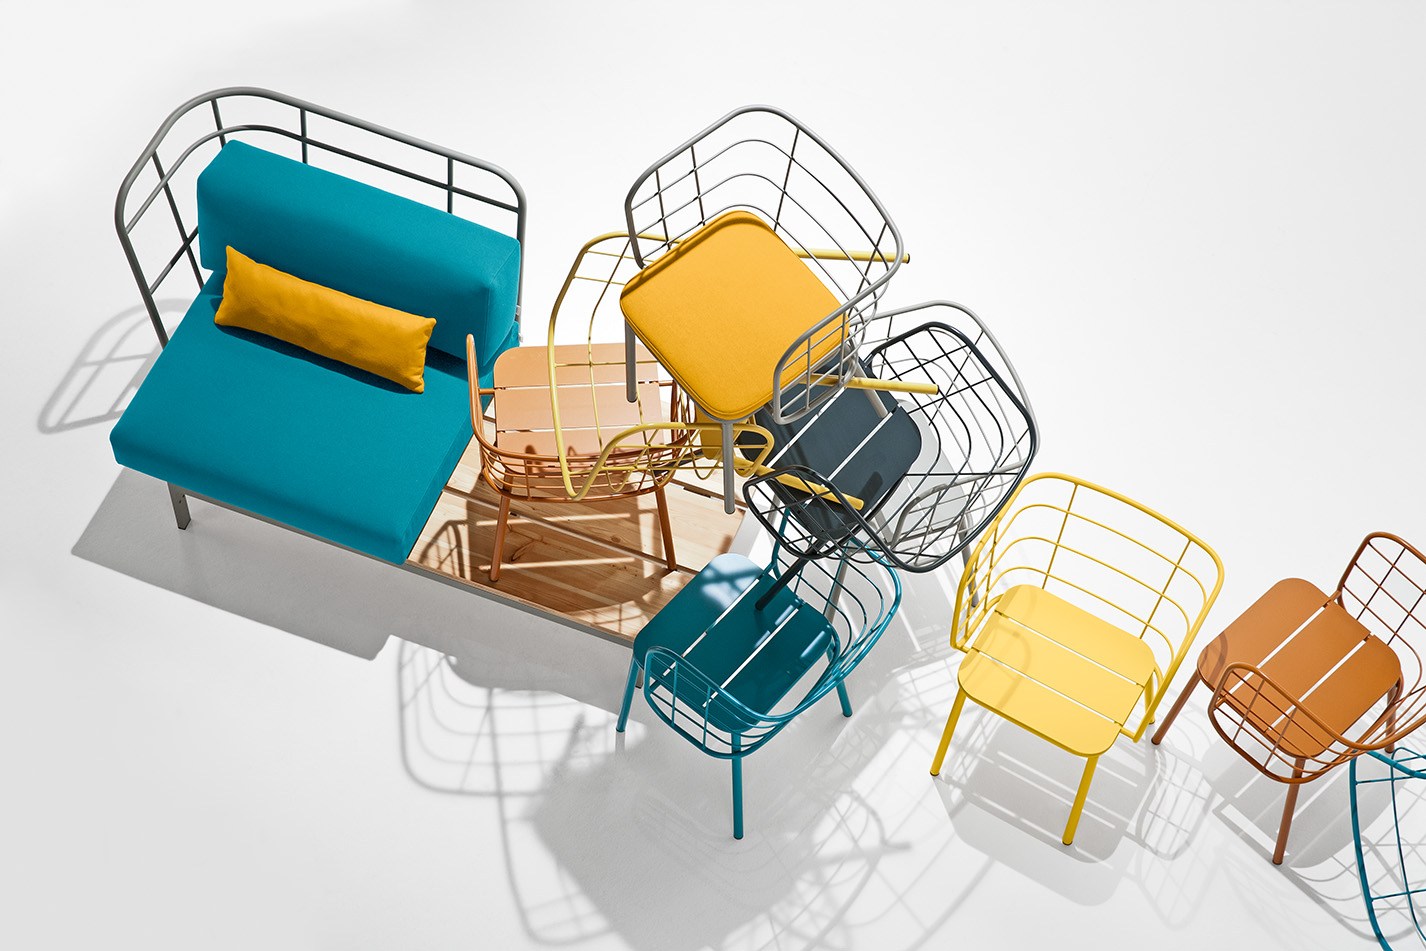 Jujube Collection by 4P1B Design Studio for Chairs & More